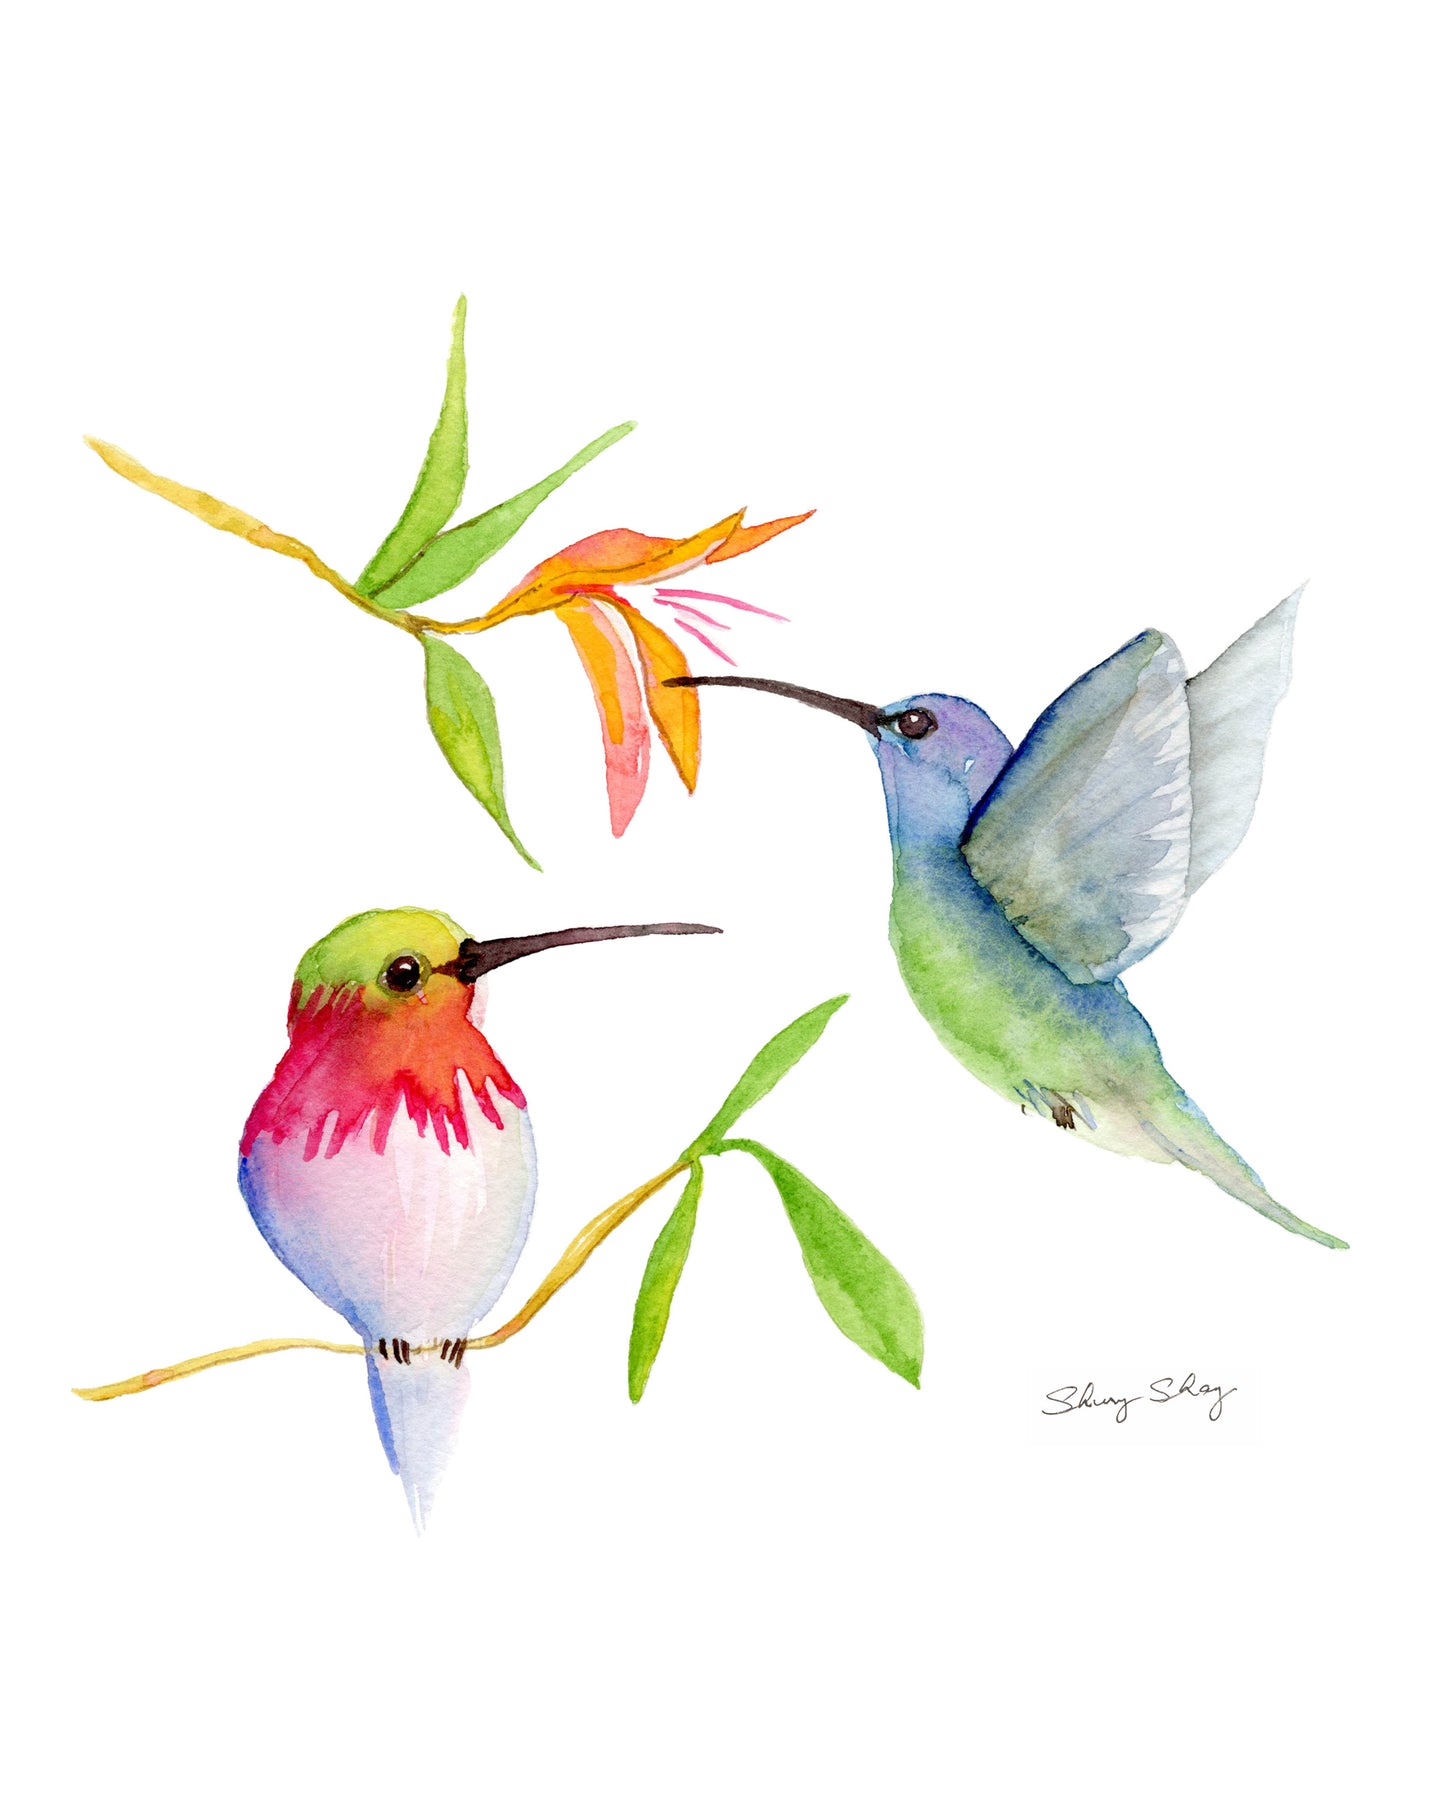 Hummingbirds - Watercolor on Wood Panel - Flamingo Shores - Original Art for Home Decor and Gifts